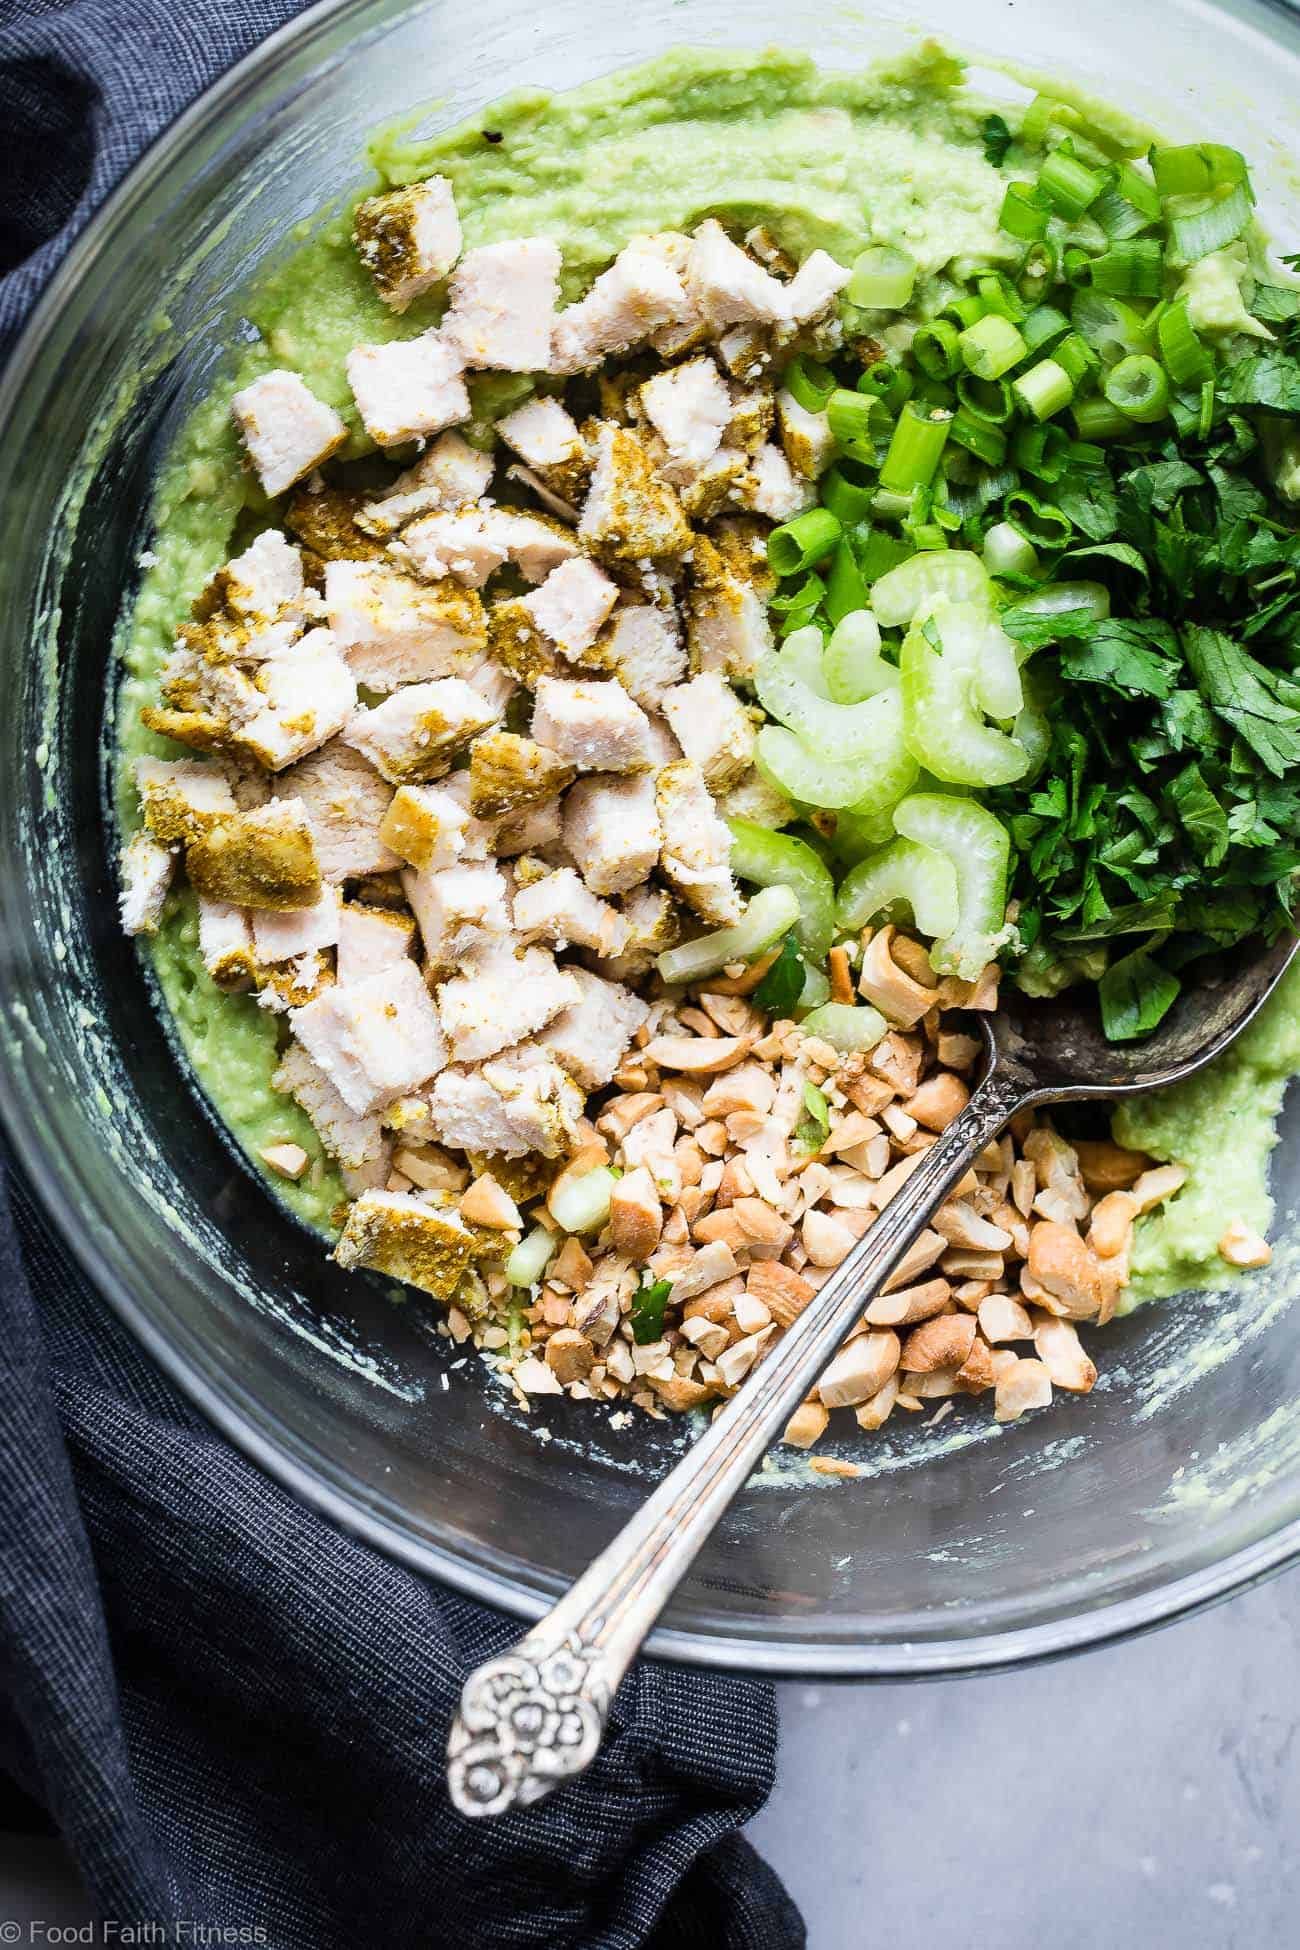 Paleo Curry Chicken Salad - This quick and easy dairy free paleo whole30 chicken salad is a low carb, keto friendly,  gluten free and whole30 compliant lunch, that is under 350 calorie, with a spicy curry kick! So creamy and delicious and great for meal prep! | Foodfaithfitness.com | @FoodFaithFit